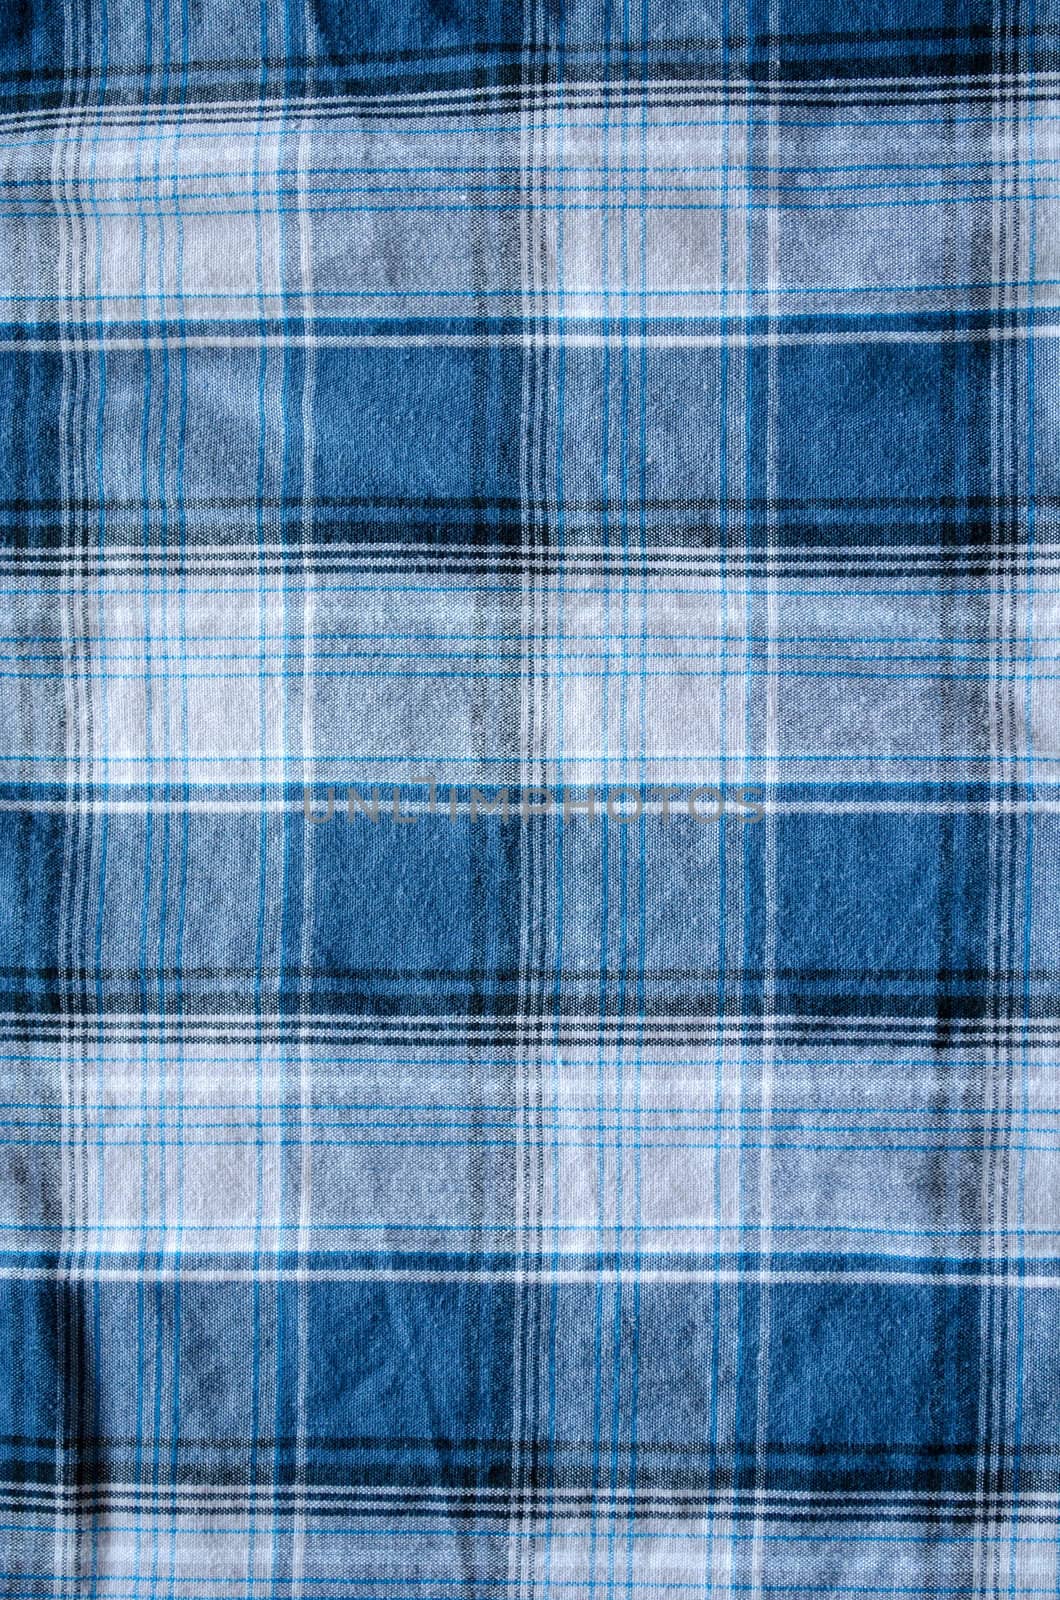 closeup of shirt cotton fabric material and square shape ornaments background.